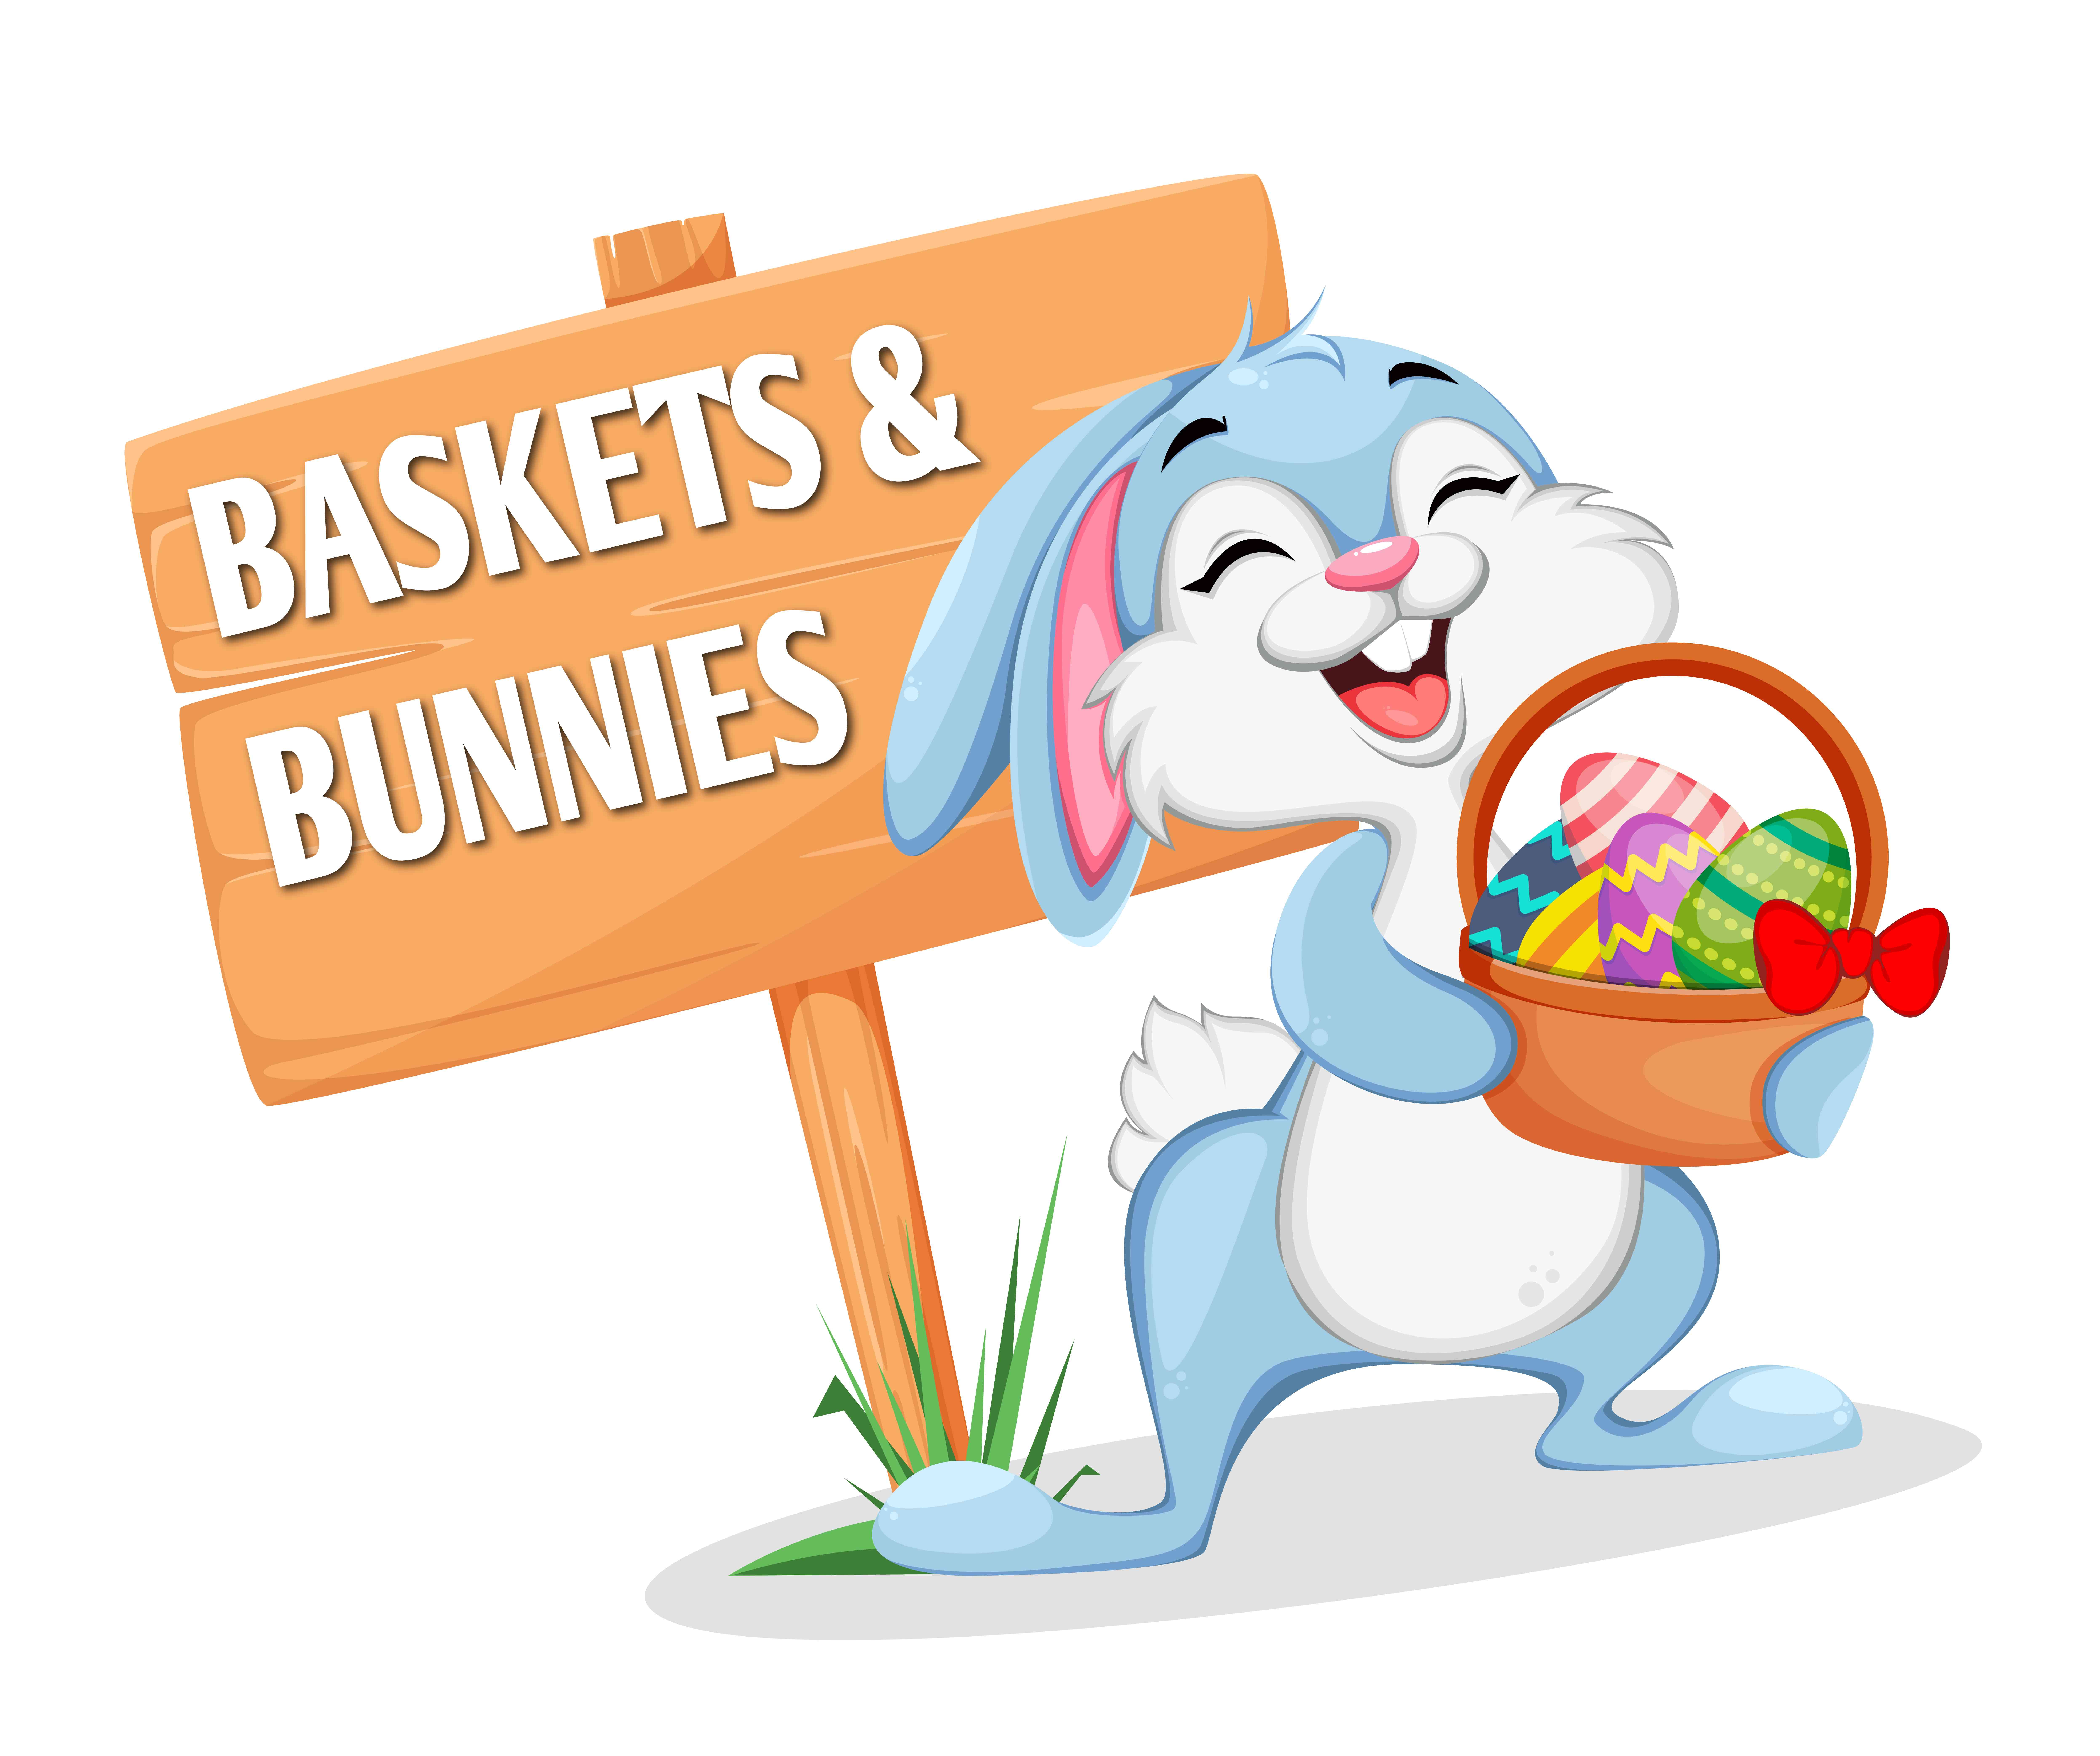 Baskets & Bunnies on April 9th